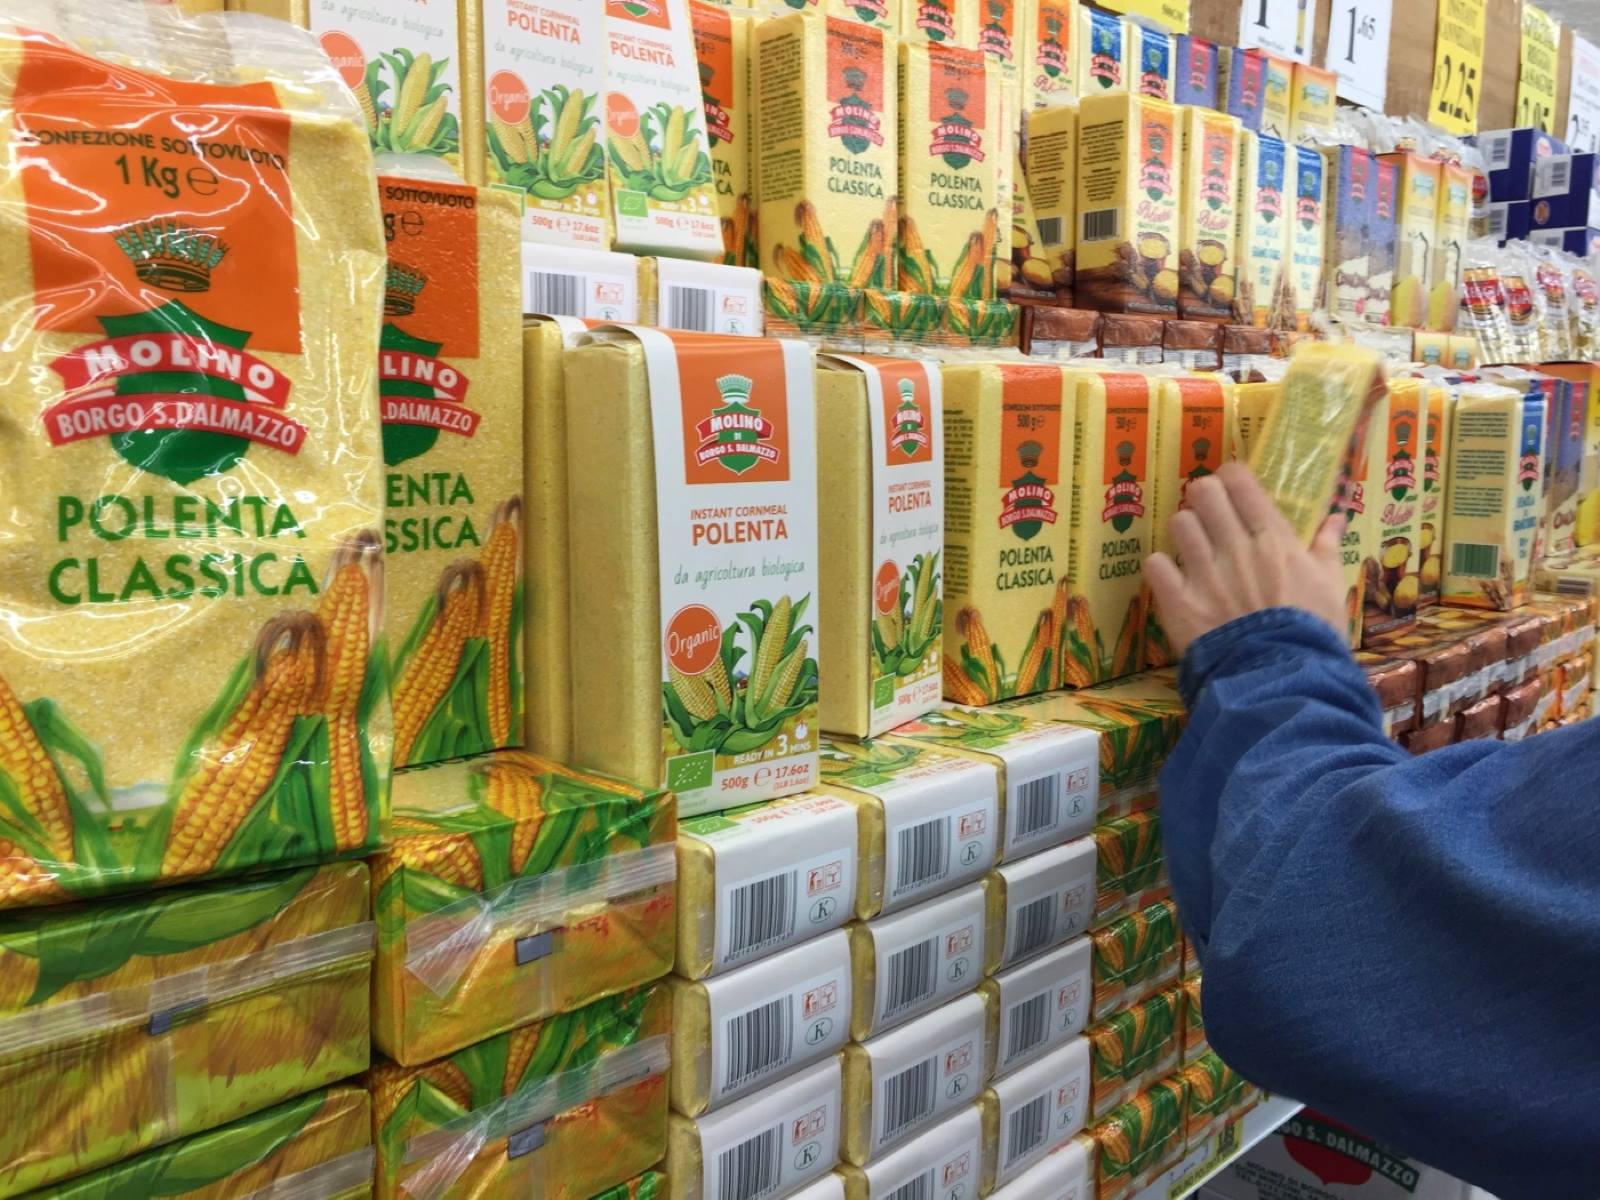 Unveiling The Secret Location Of Polenta In Grocery Stores!